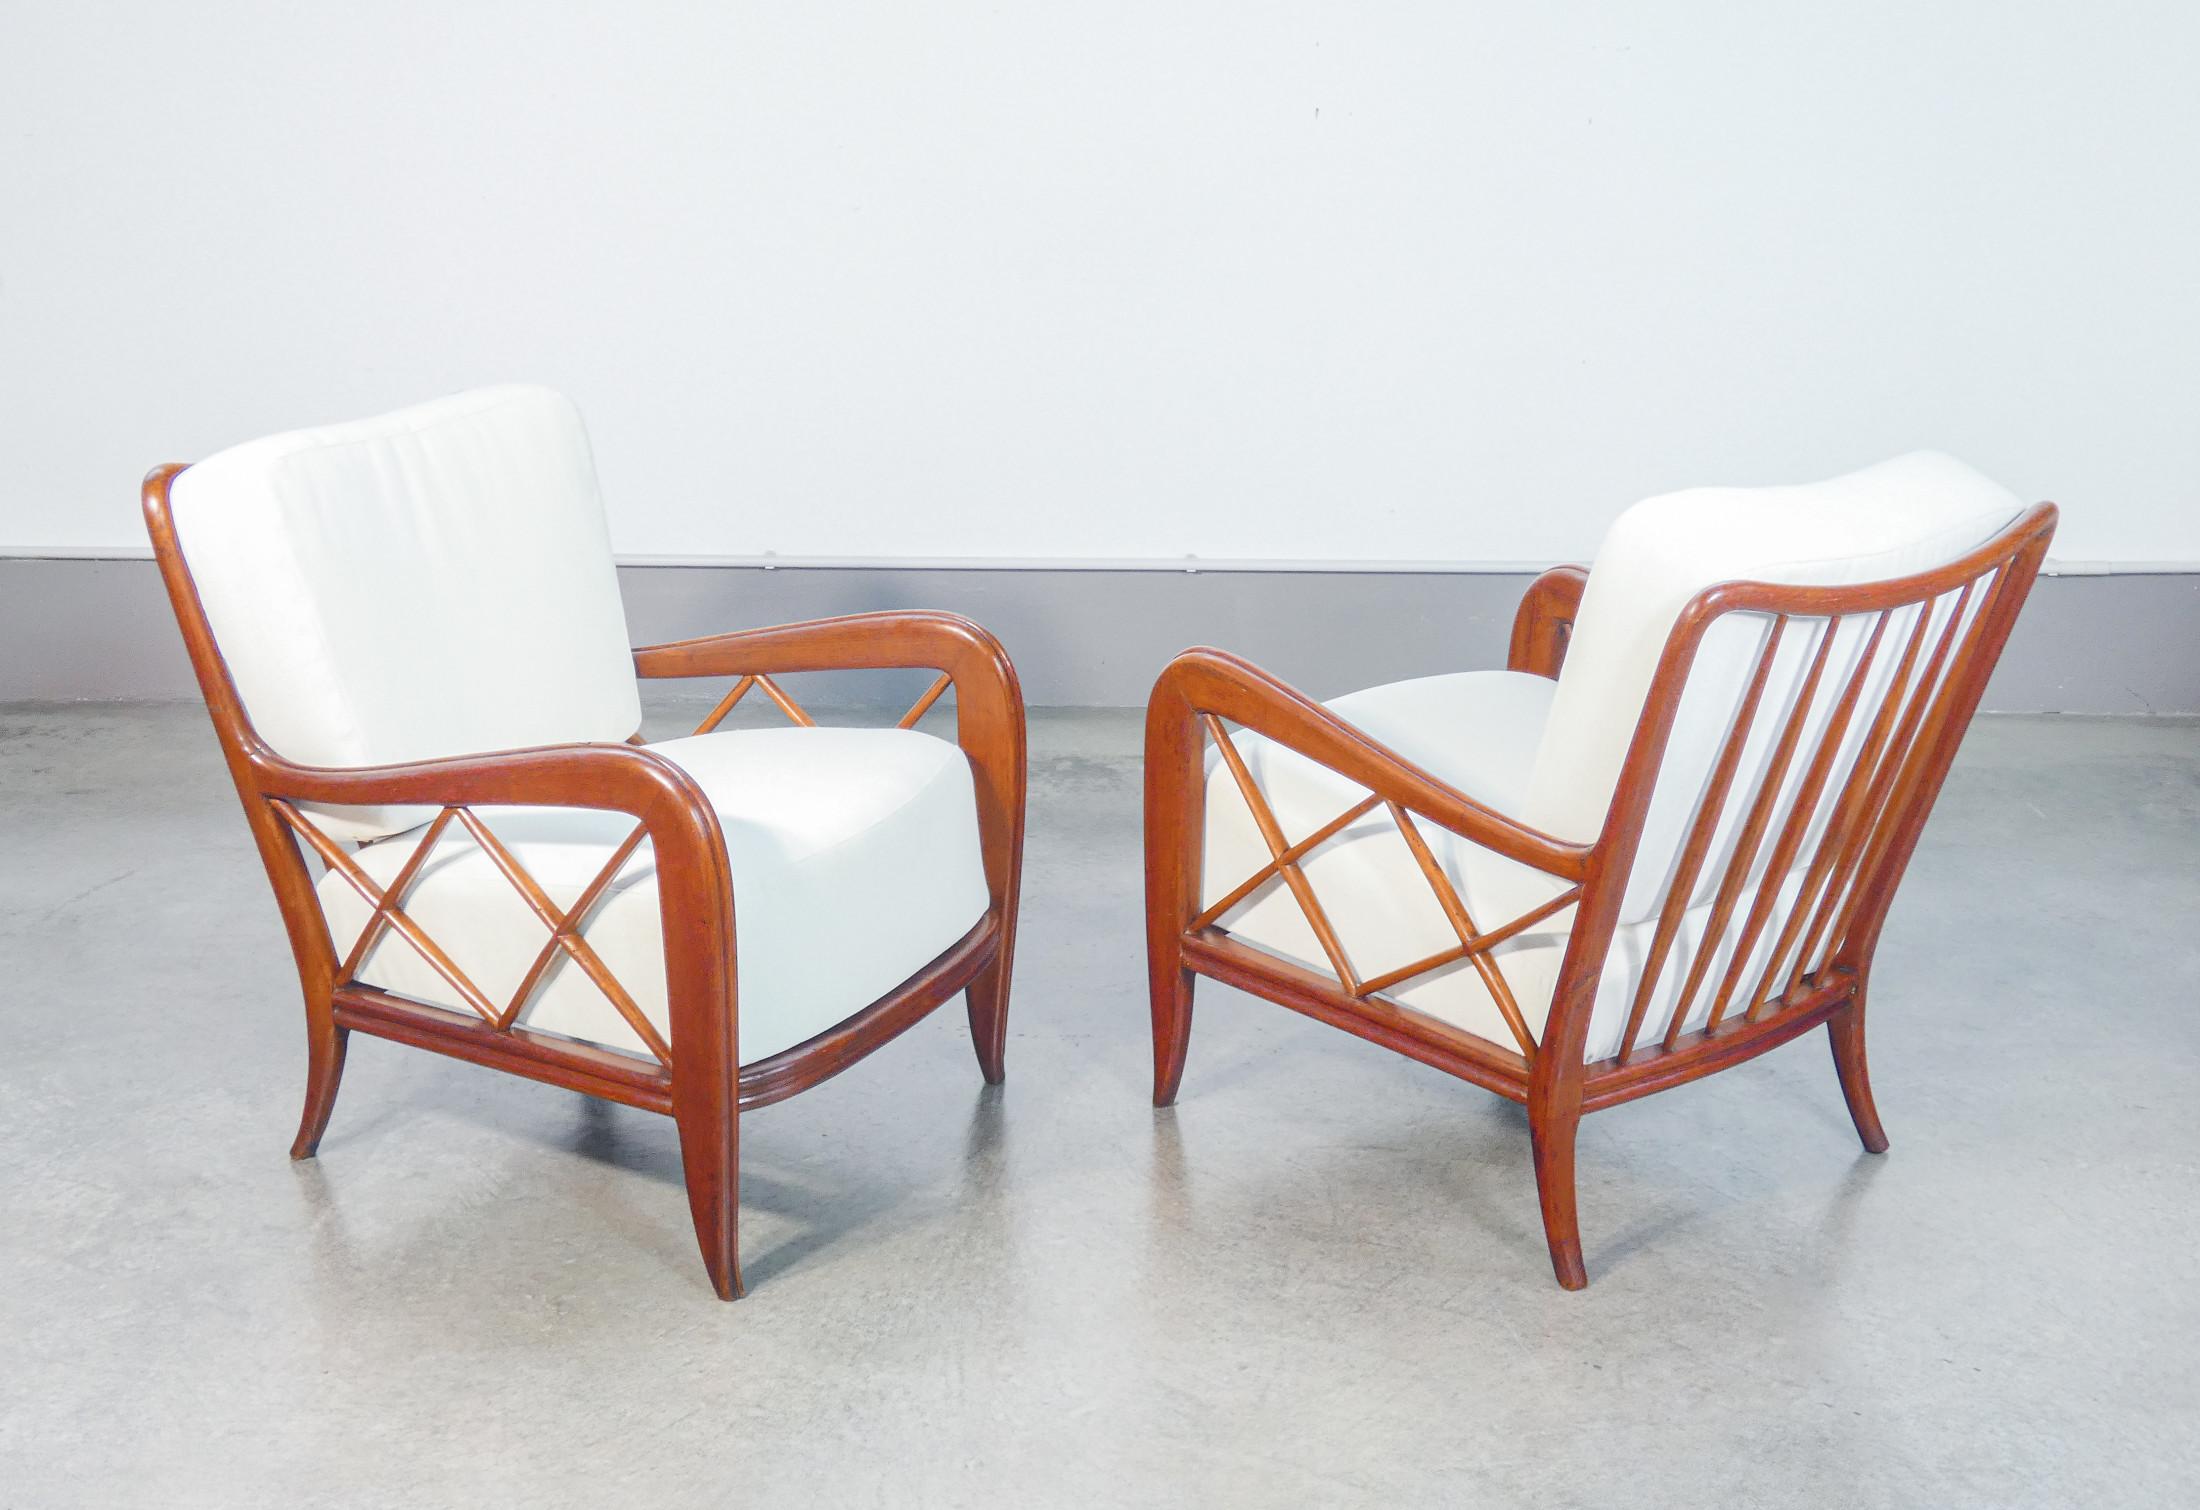 Pair of armchairs
design Paolo BUFFA,
solid wood.

ORIGIN
Italy

PERIOD
1940s

DESIGNER
Paolo BUFFA (1903-1970) was an Italian furniture designer known for his unique style that fused elements of Neoclassicism and Art Deco with a fluid